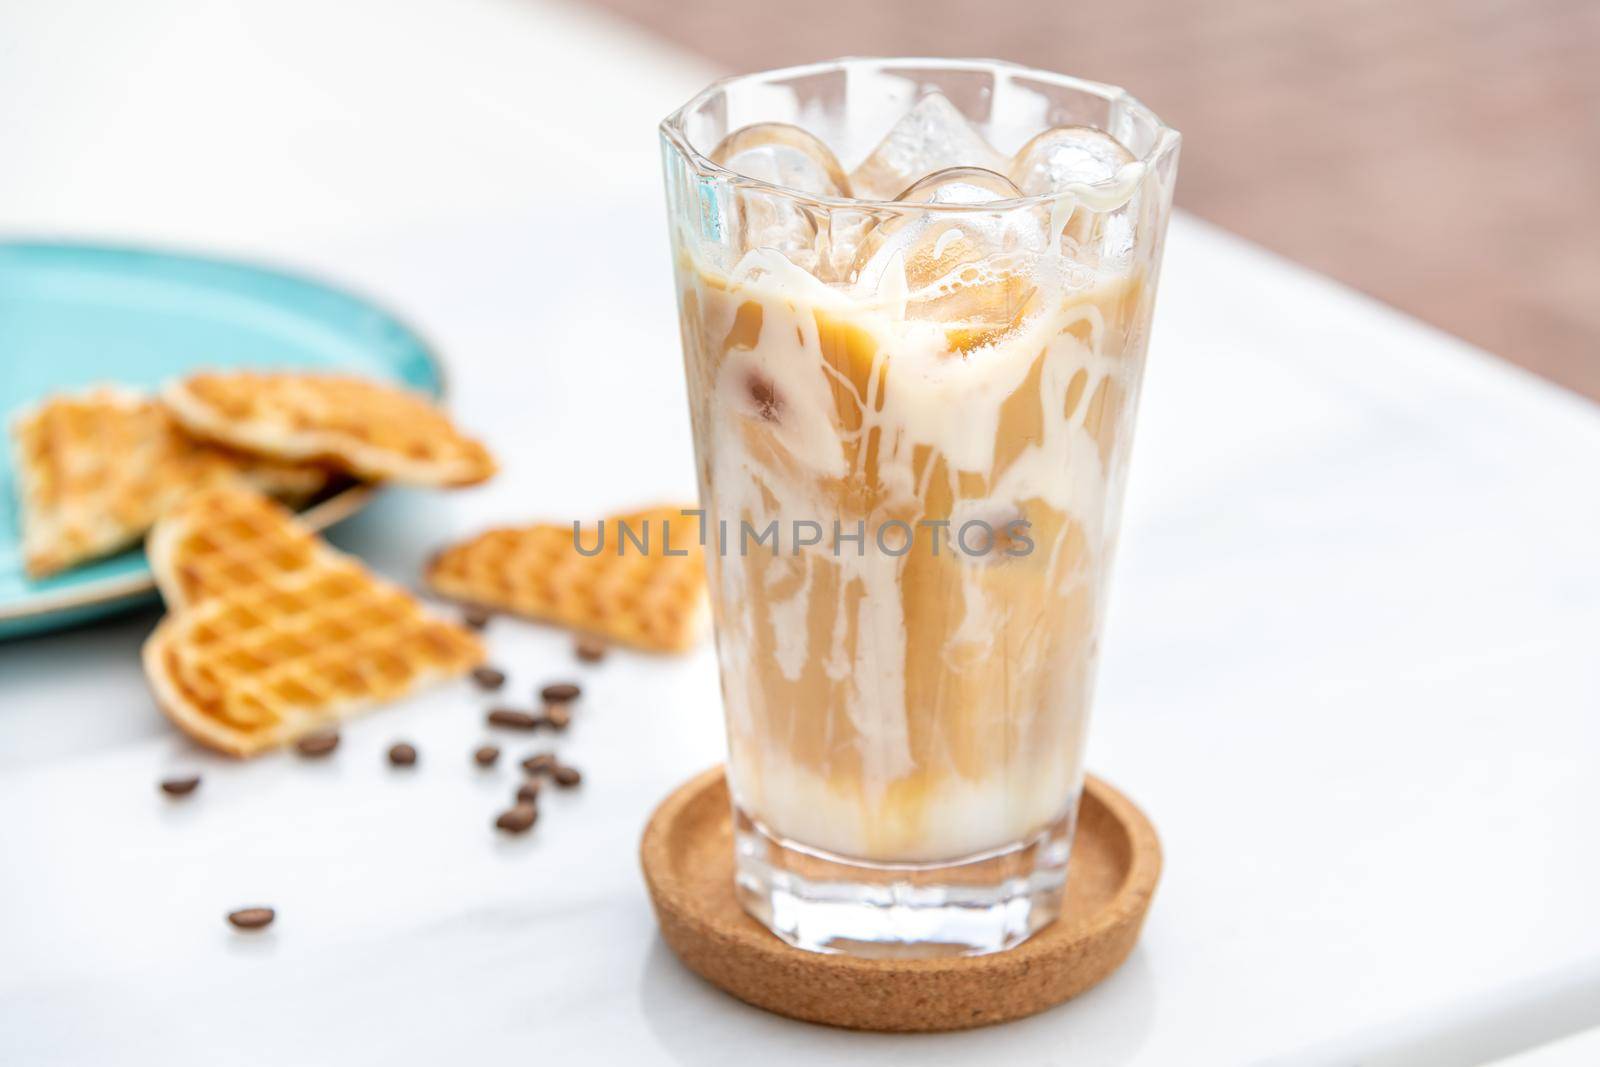 Iced caramel latte coffee in a tall glass with caramel syrup by Sonat